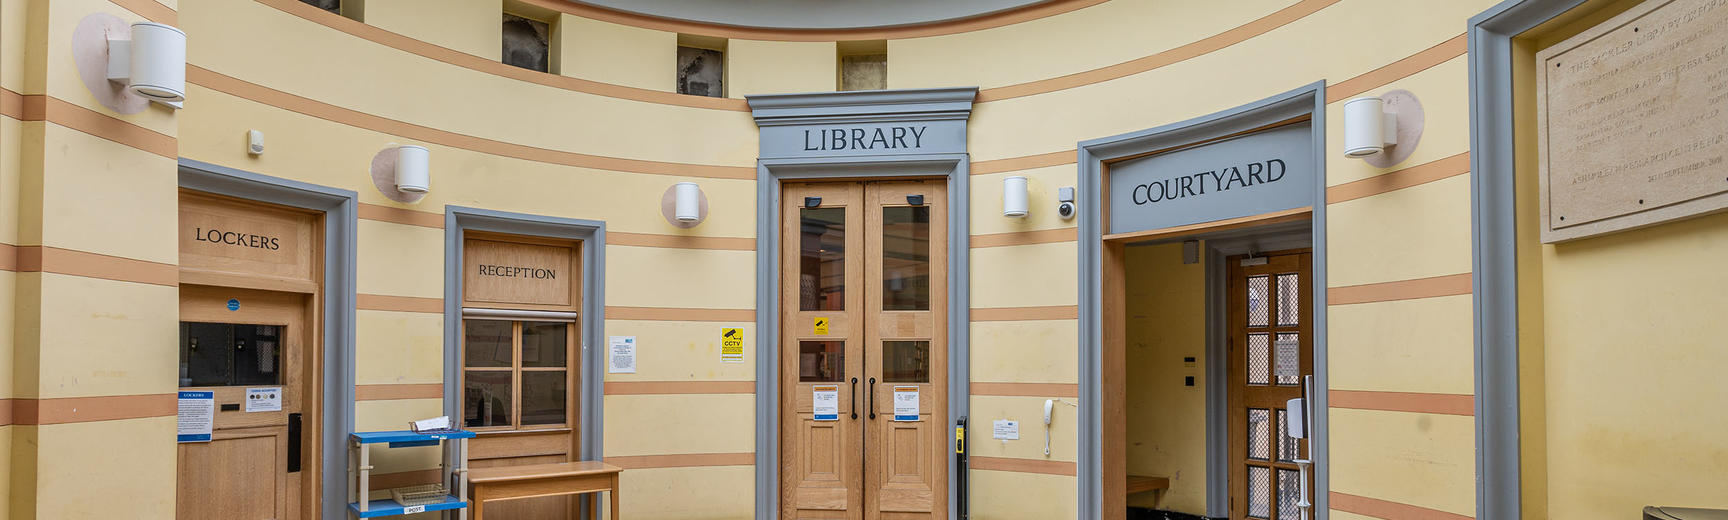 A decorated rotunda showing a wooden door entrance to the library